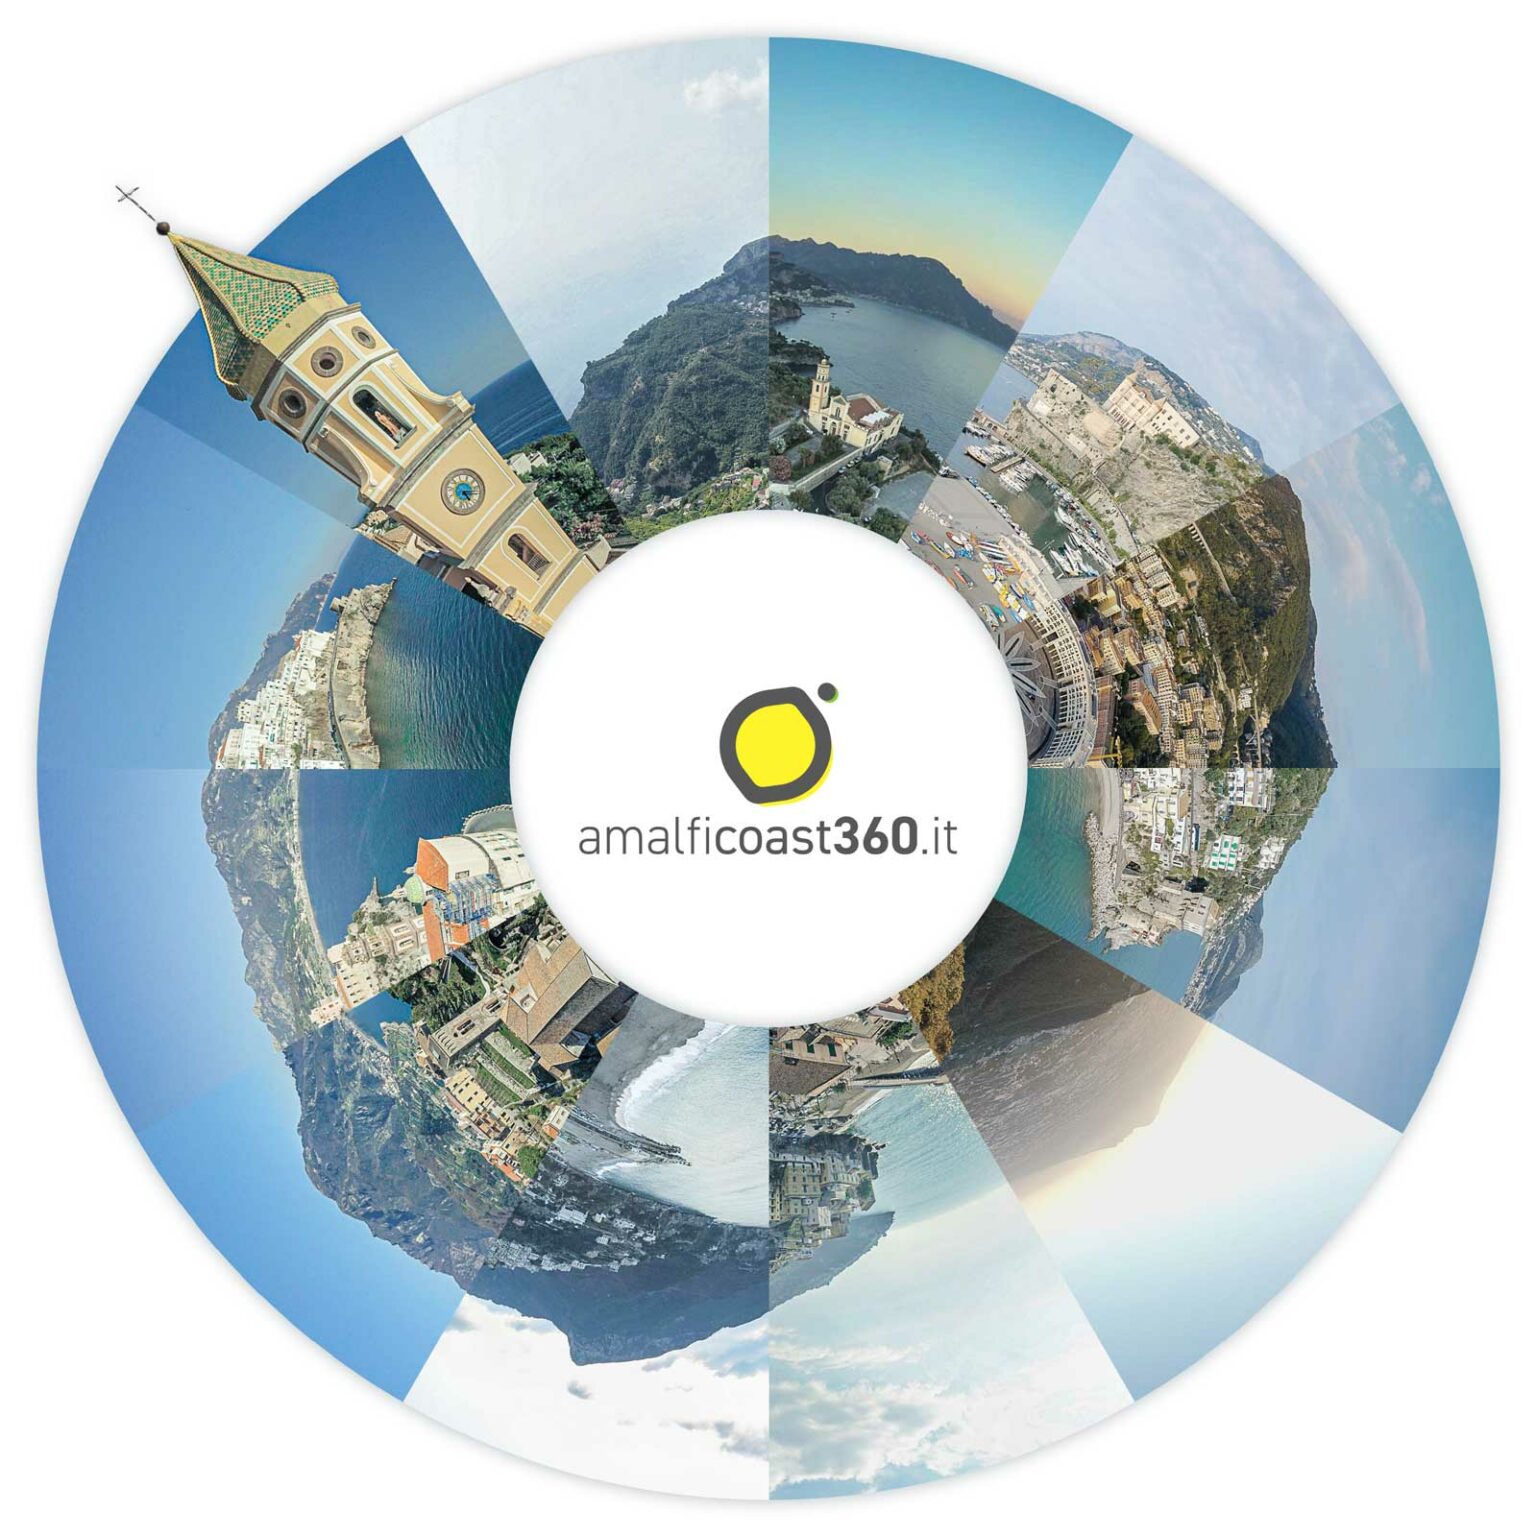 Amalfi Coast 360 – Little planet aerial spherical graphic cover